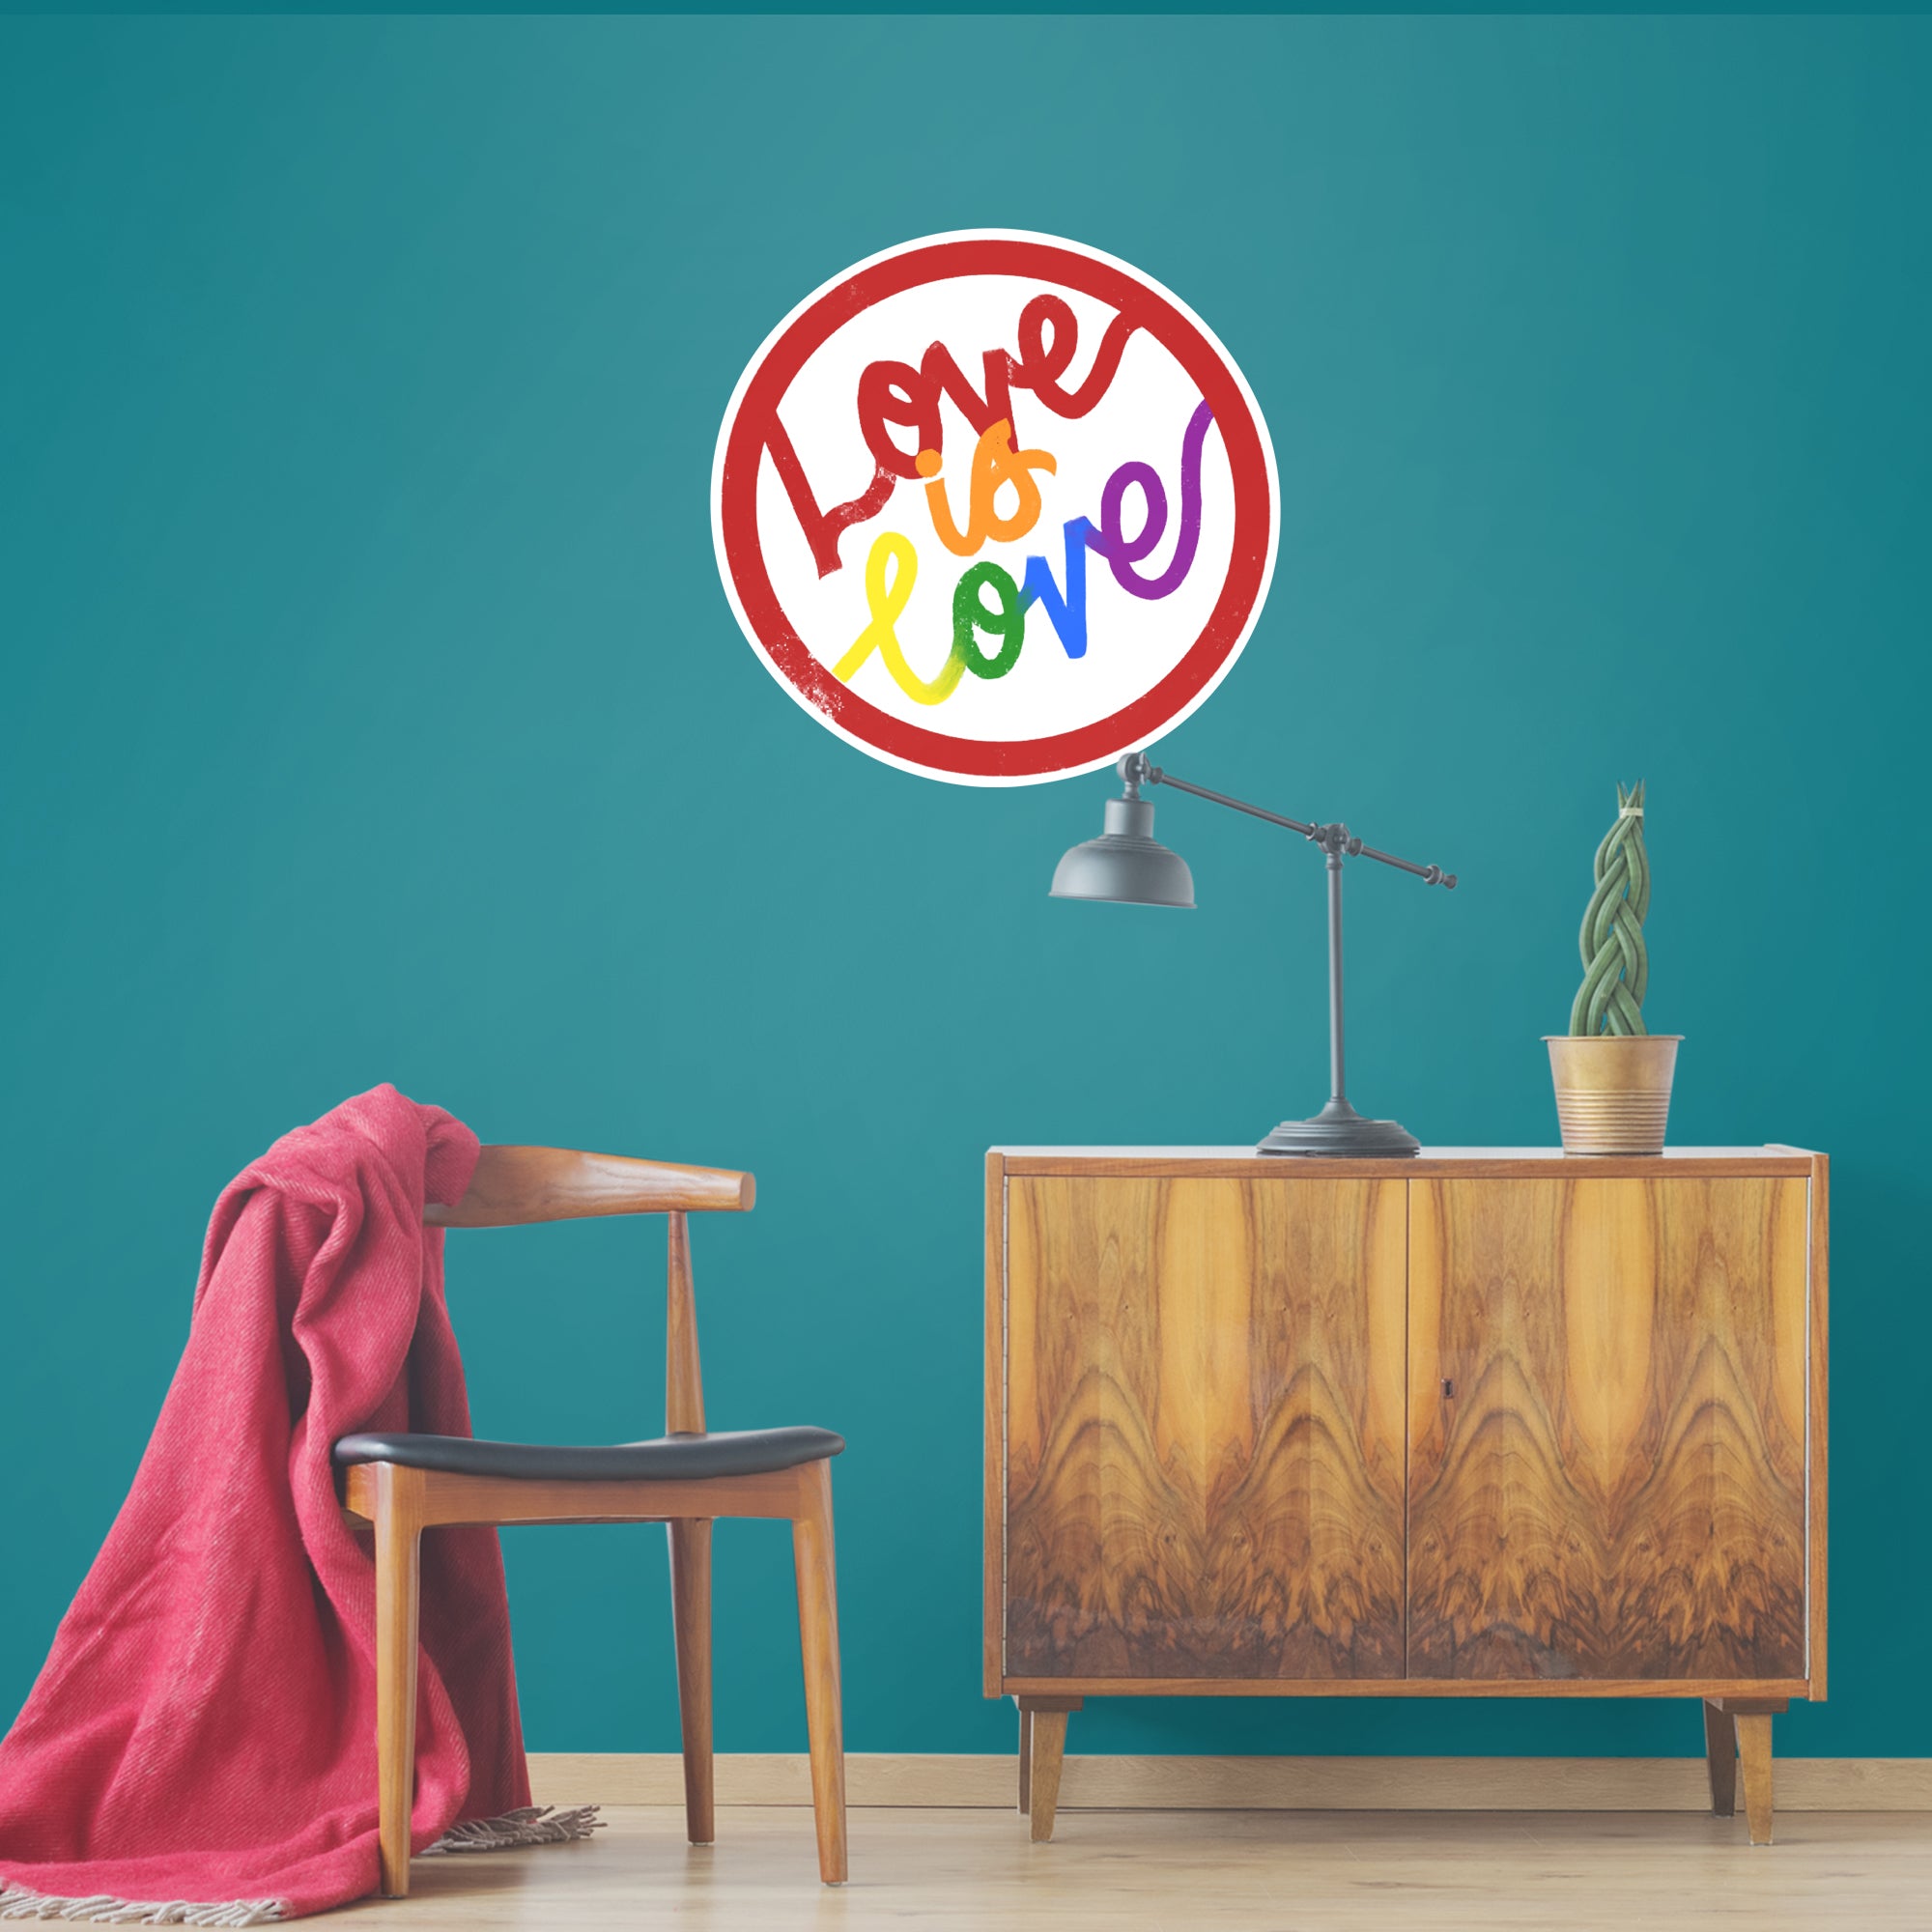 Love Is Love - Officially Licensed Big Moods Removable Wall Decal XL by Fathead | Vinyl